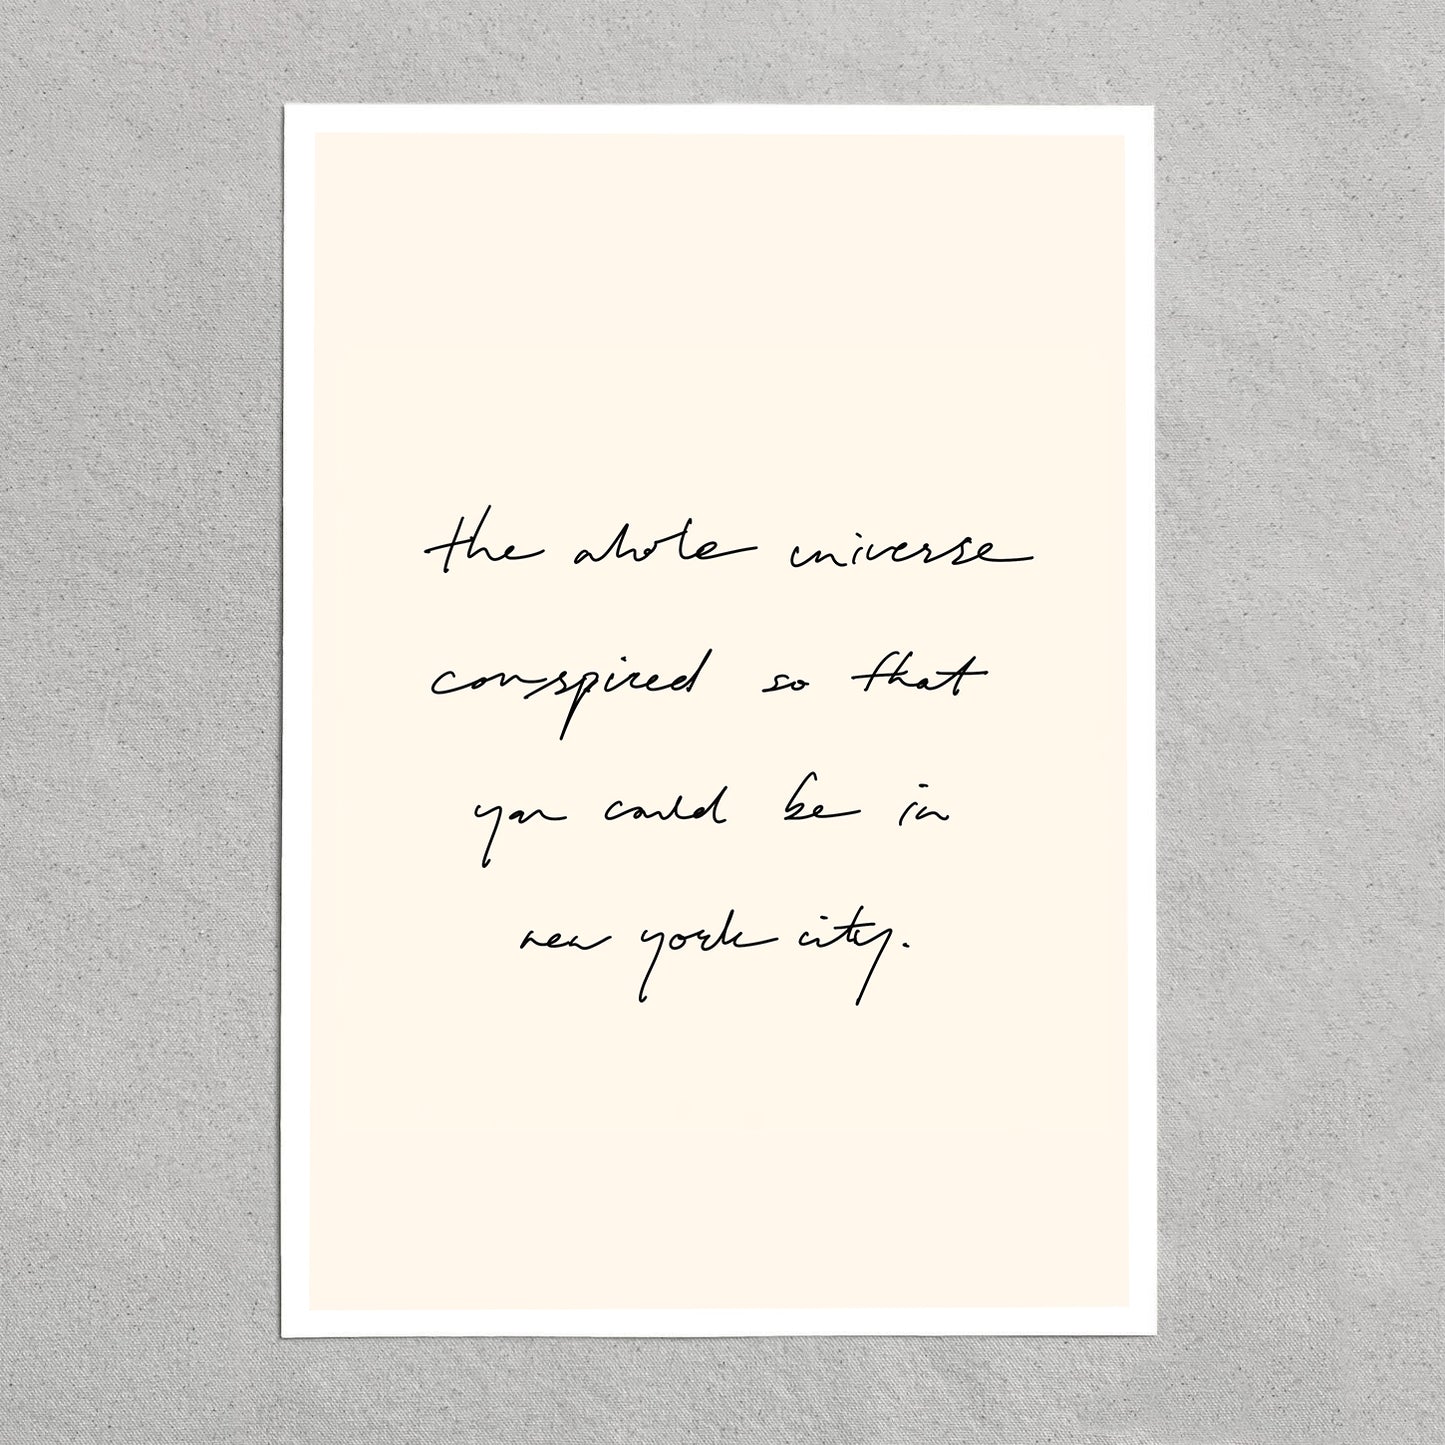 quote: "the whole universe conspired so that you could be in new york city"